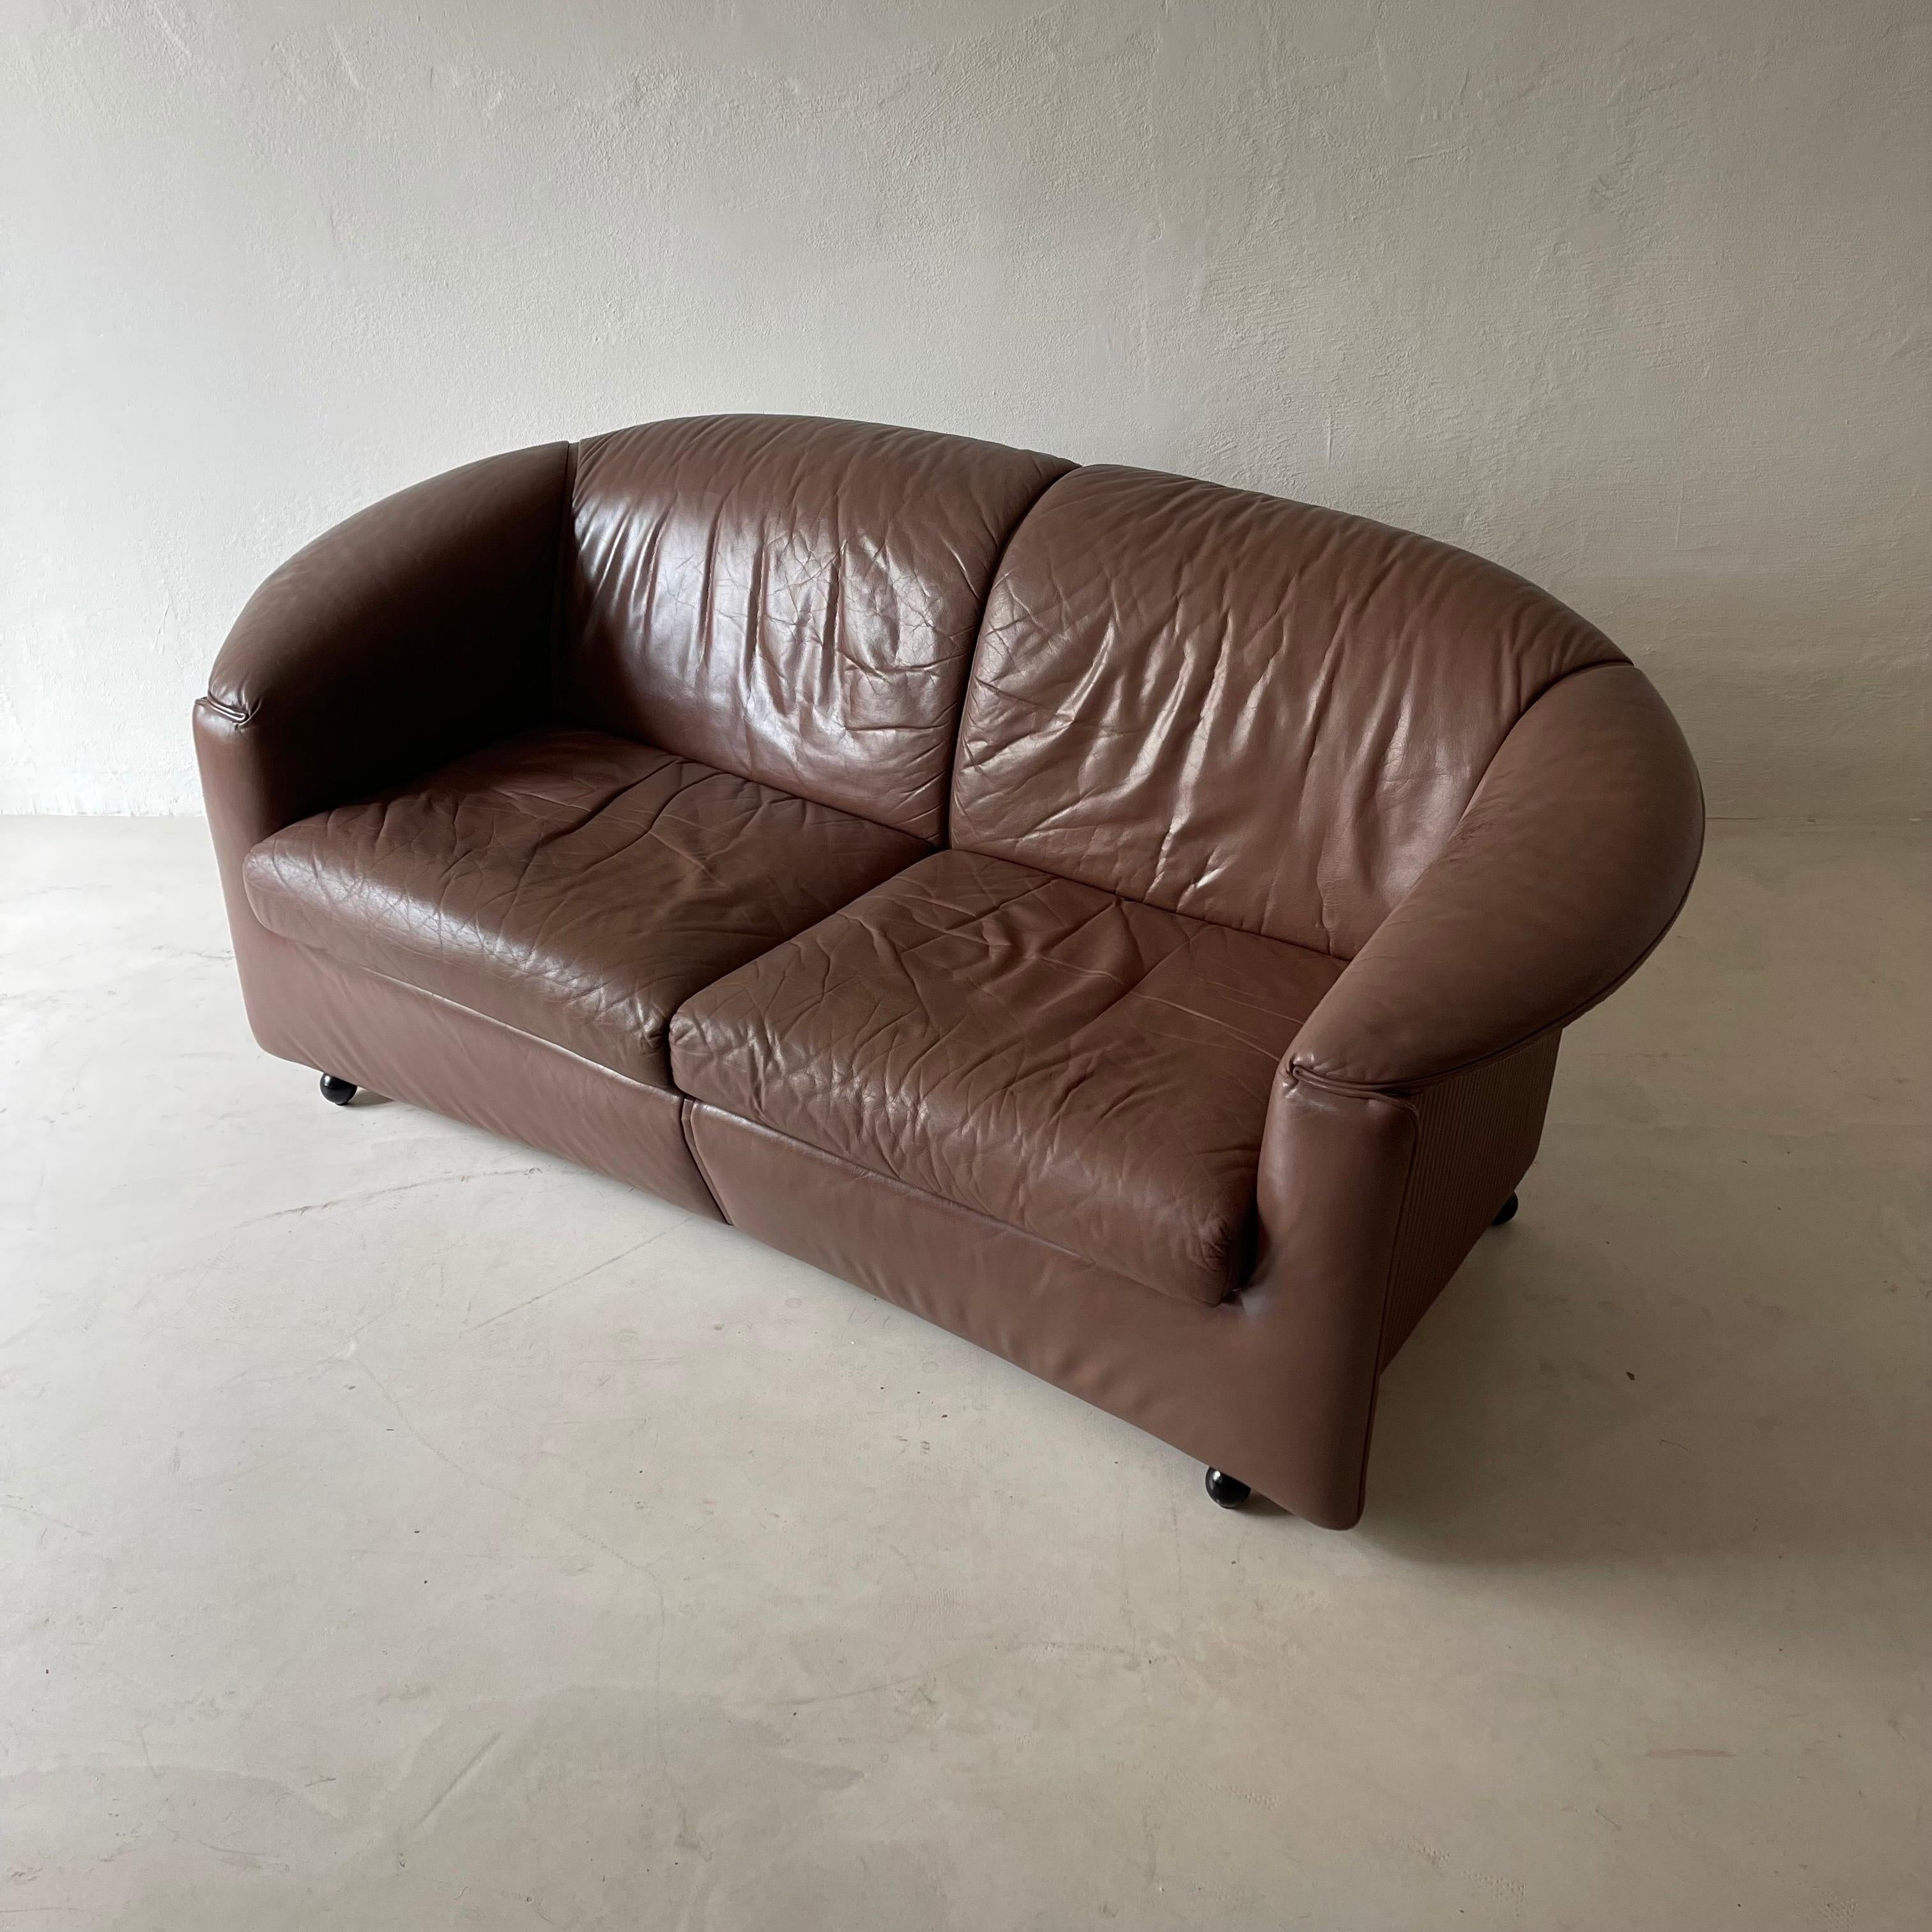 Aura sofa loveseat by Paolo Piva for Wittmann.